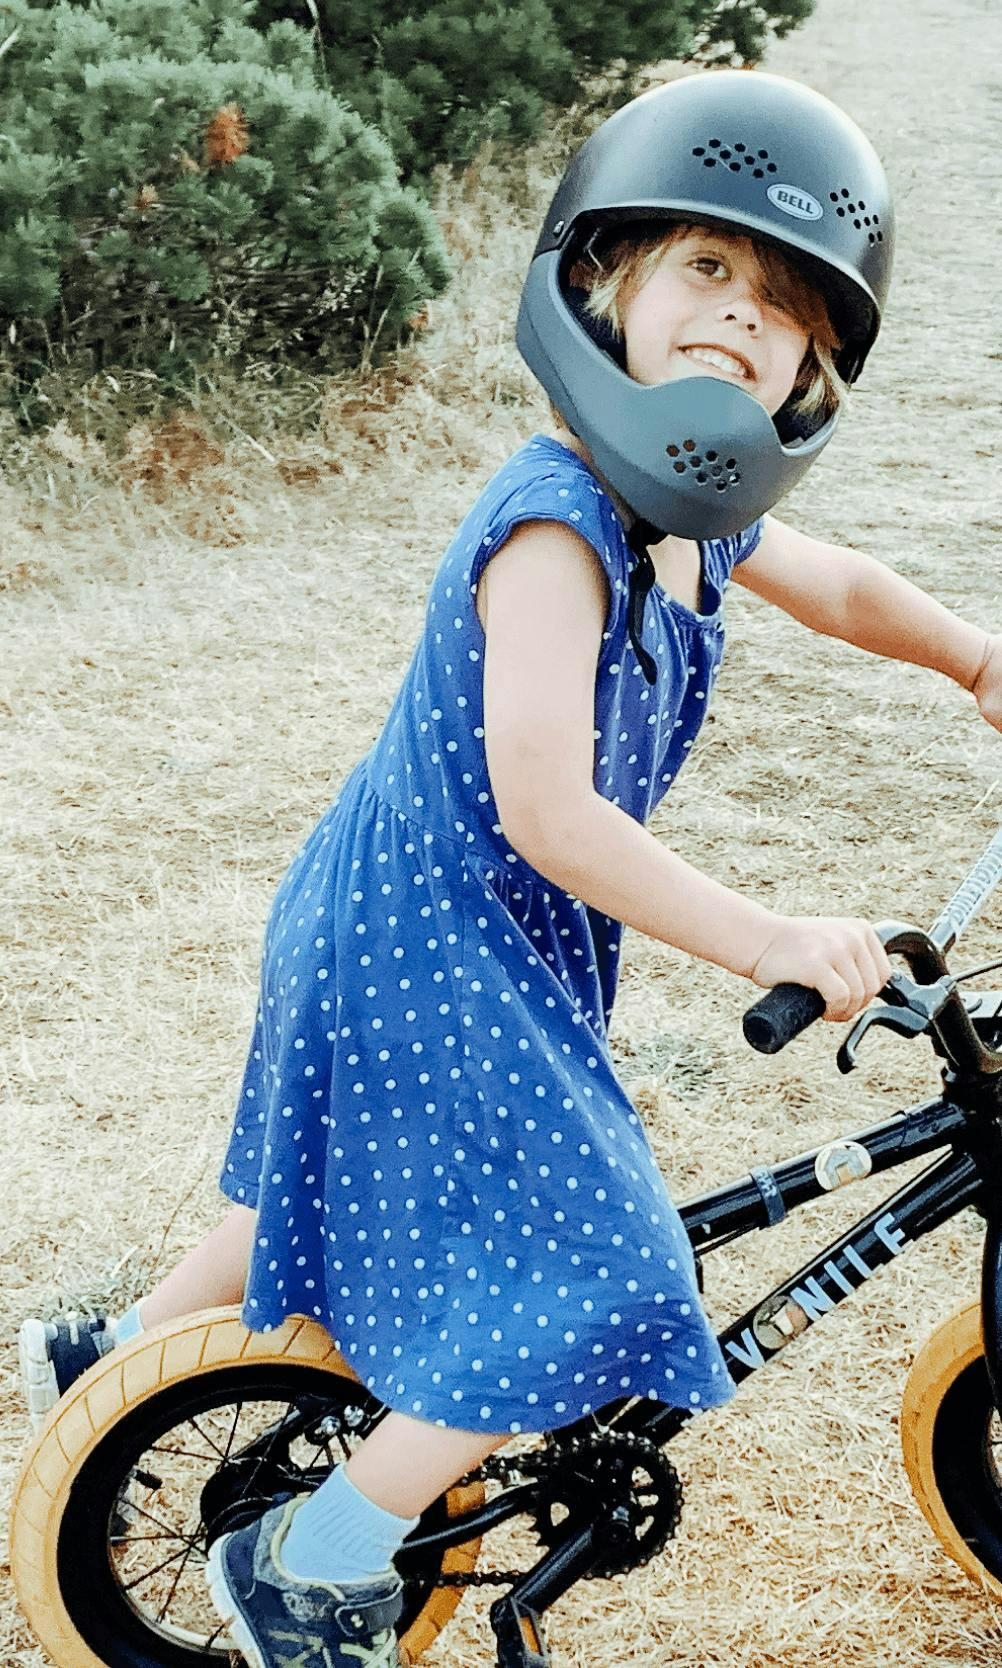 Picture of Maia smiling on her bicycle